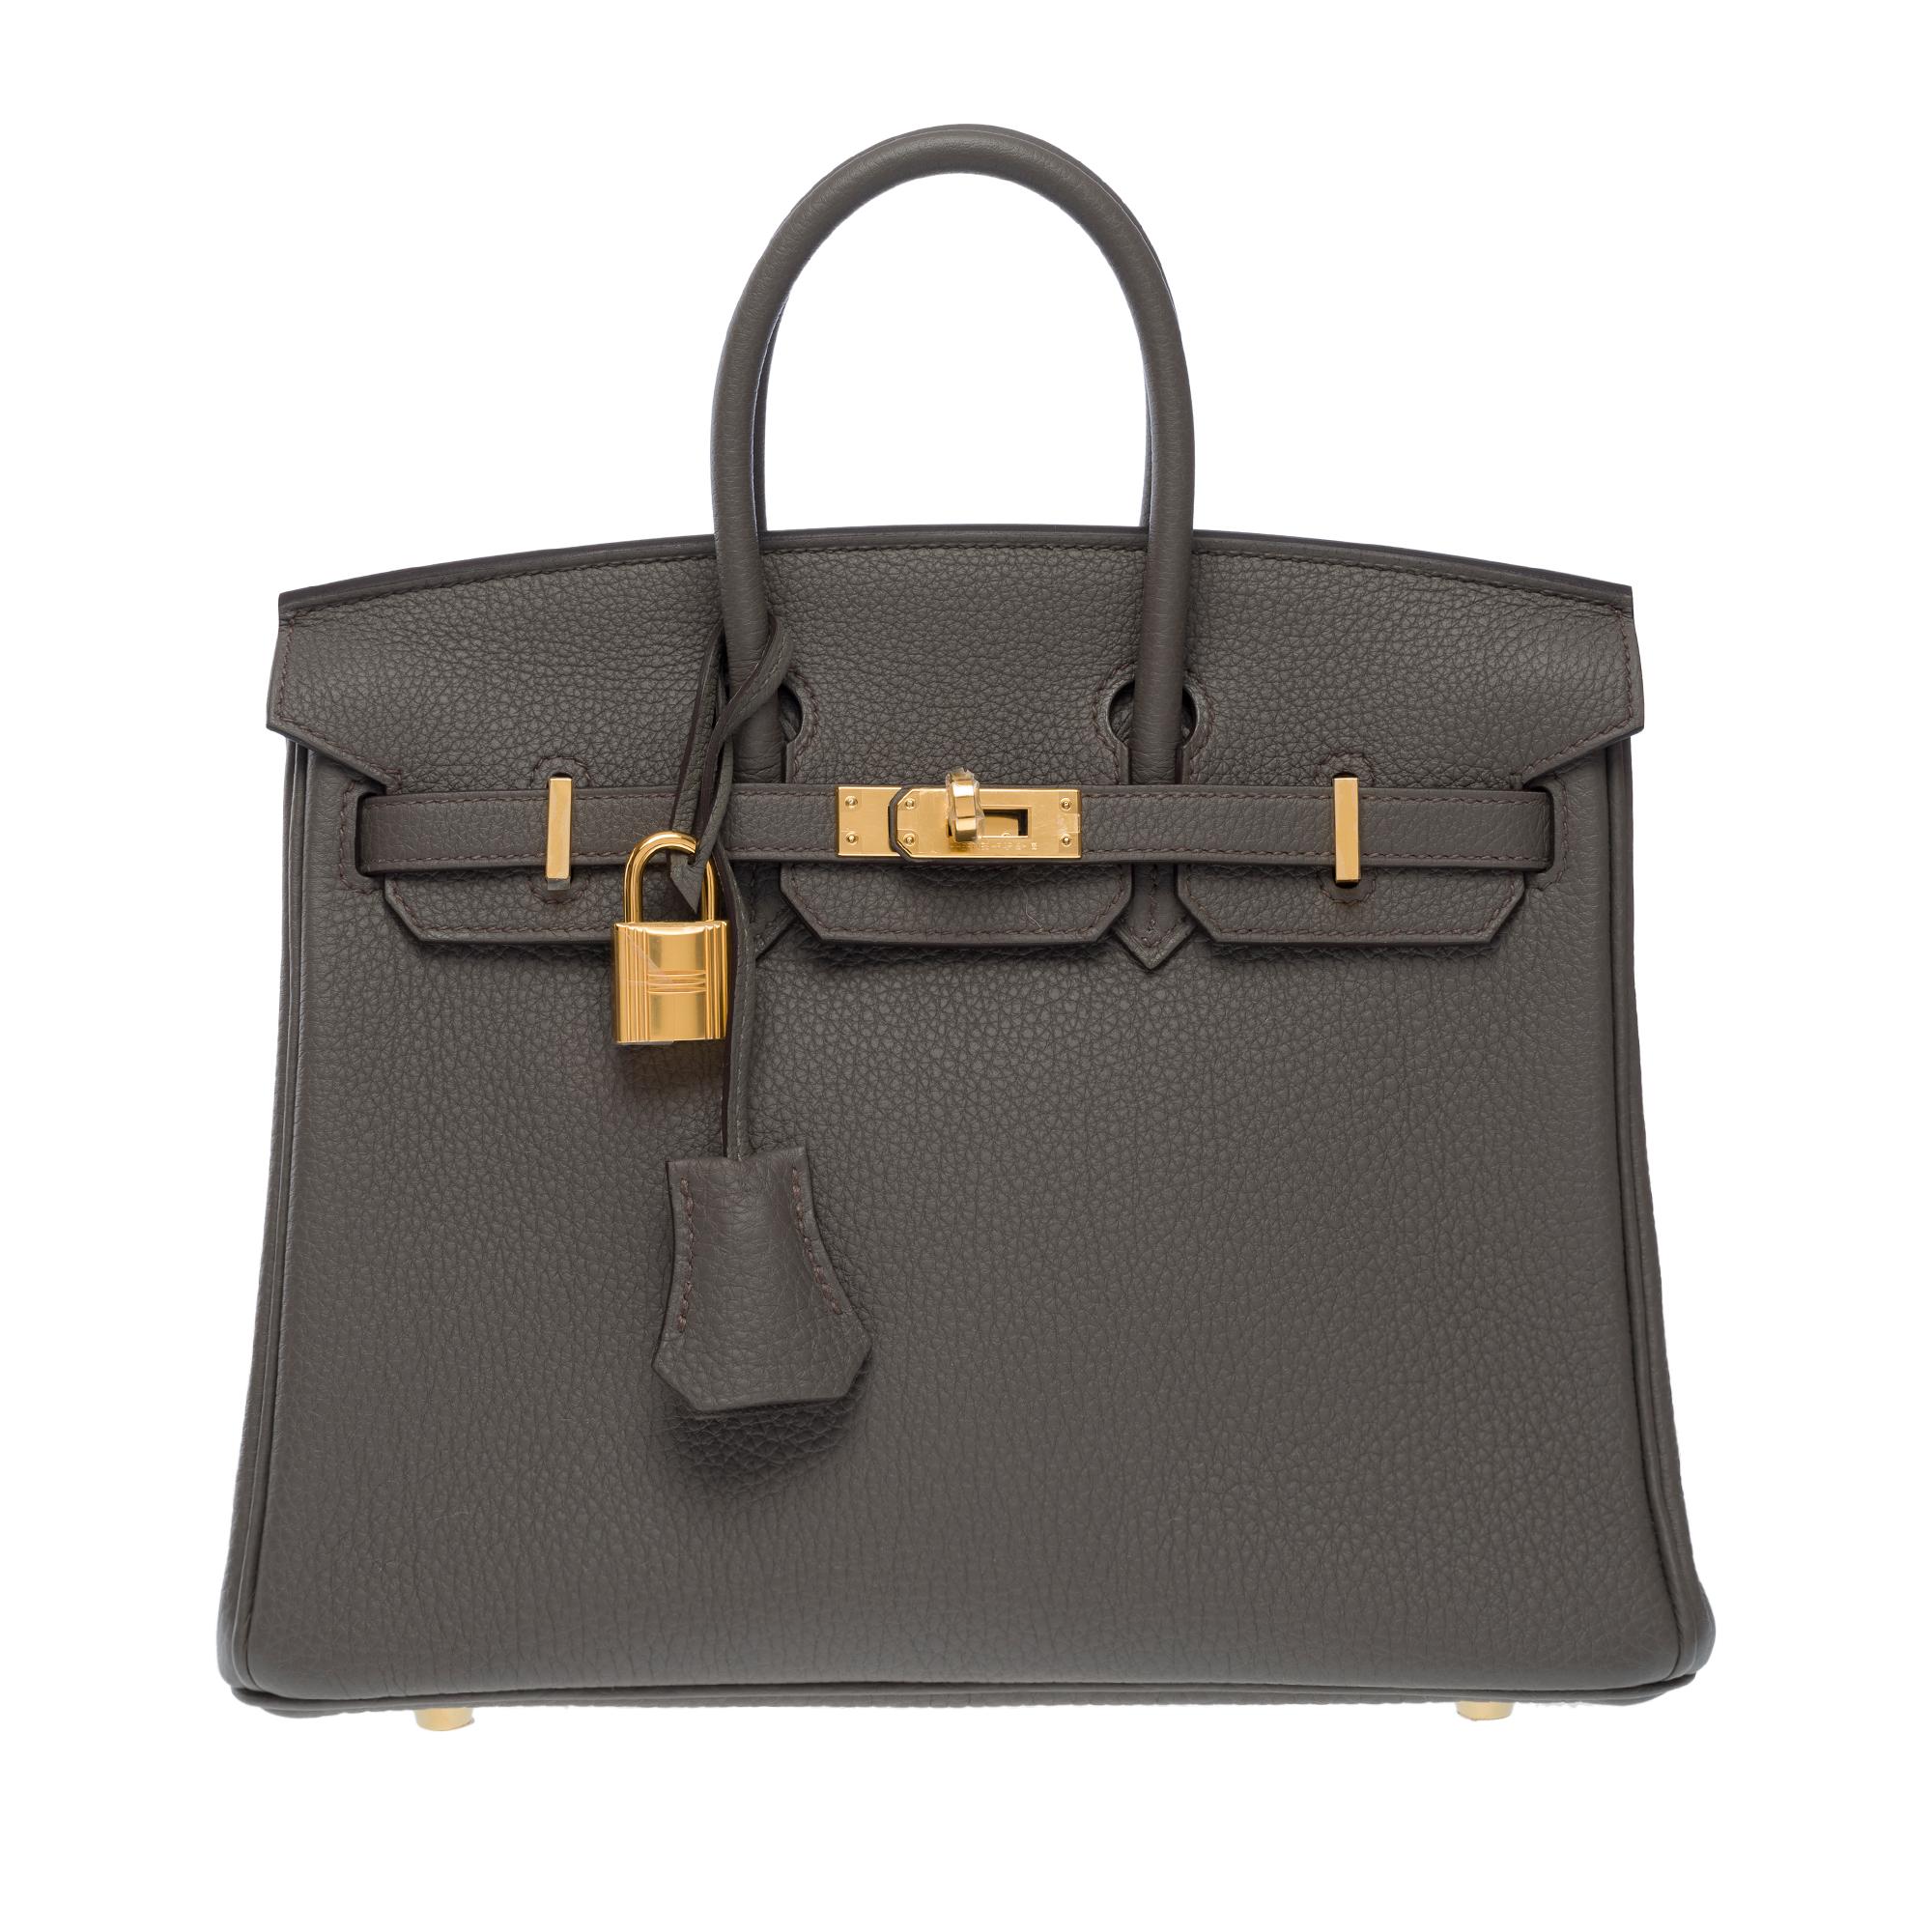 Amazing​ ​Birkin​ ​25​ ​handbag​ ​in Gris​ ​Etain​ ​Togo​ ​leather,​ ​gold​ ​plated​ ​metal​ ​hardware,​ ​double​ ​handle​ ​in​ ​gray​ ​leather​ ​allowing​ ​a​ ​hand​ ​carry

Flap​ ​closure
Grey​ ​leather​ ​inner​ ​lining,​ ​one​ ​zipped​ ​pocket,​